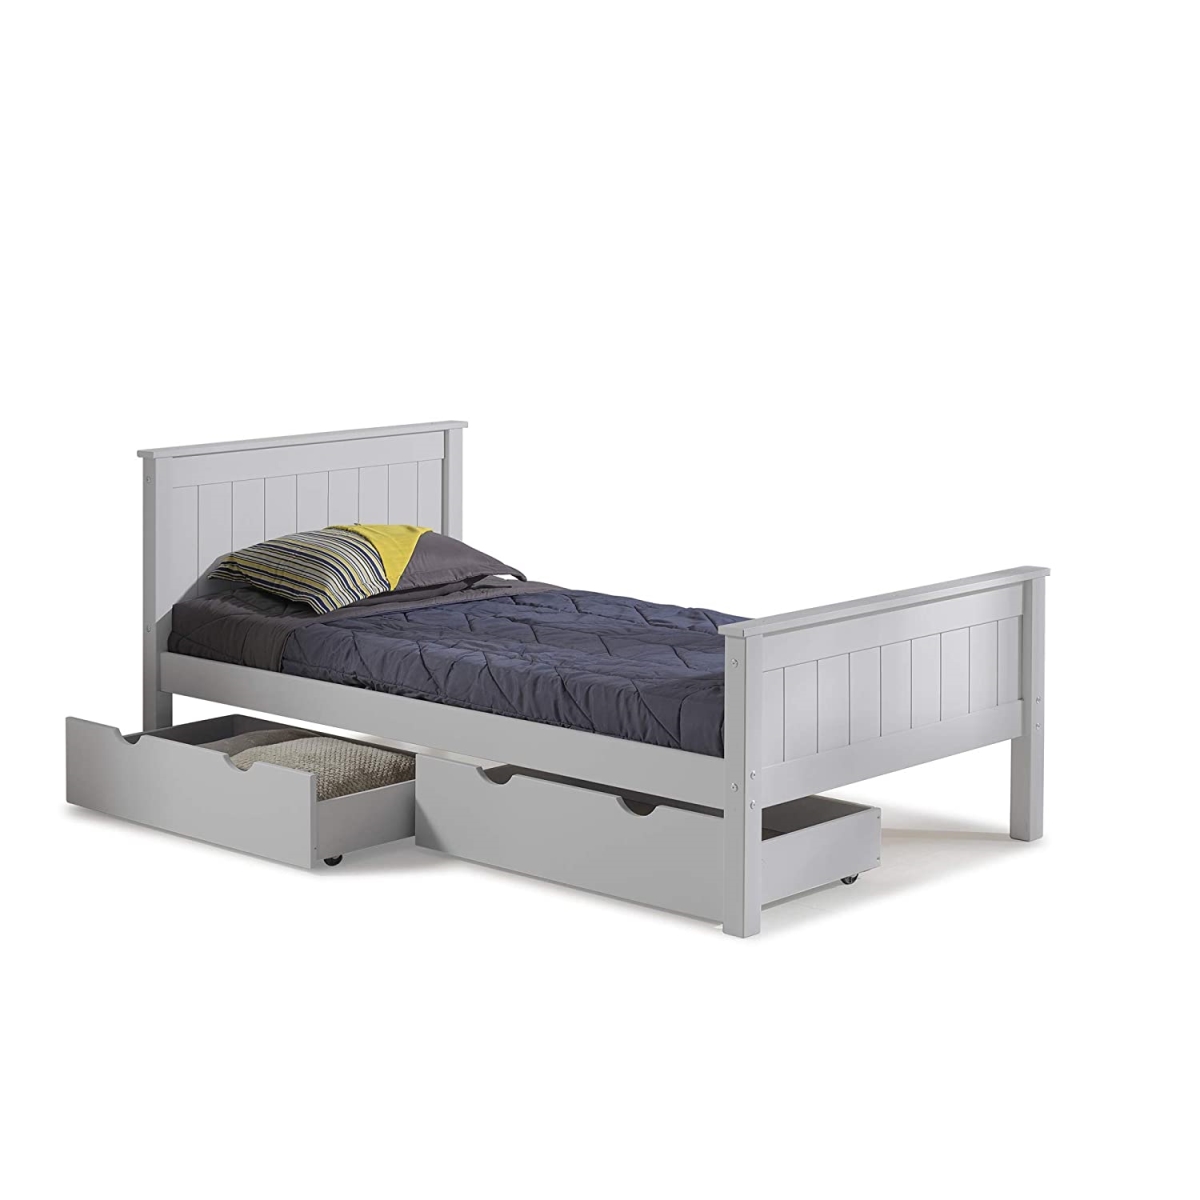 Picture of Alaterre AJHO1080S Harmony Twin Size Wood Platform Bed with Storage Drawers, Dove Gray